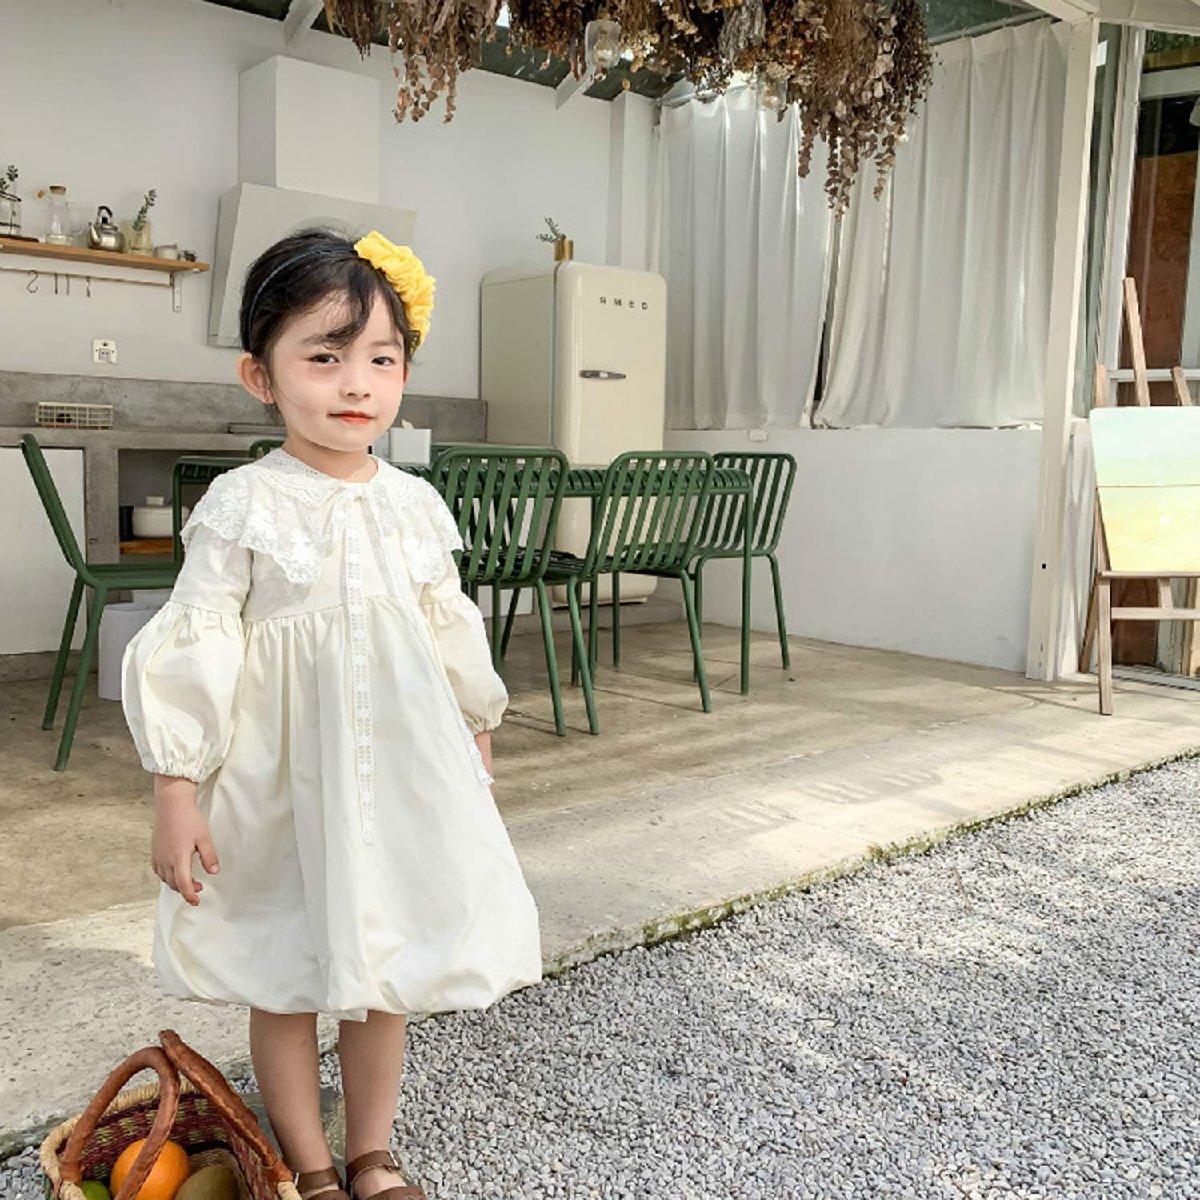 [SLINX] baby clothes One-piece girl child attaching collar pretty Kids .. sama manner soft gya The - spring summer autumn tunic outing present 1